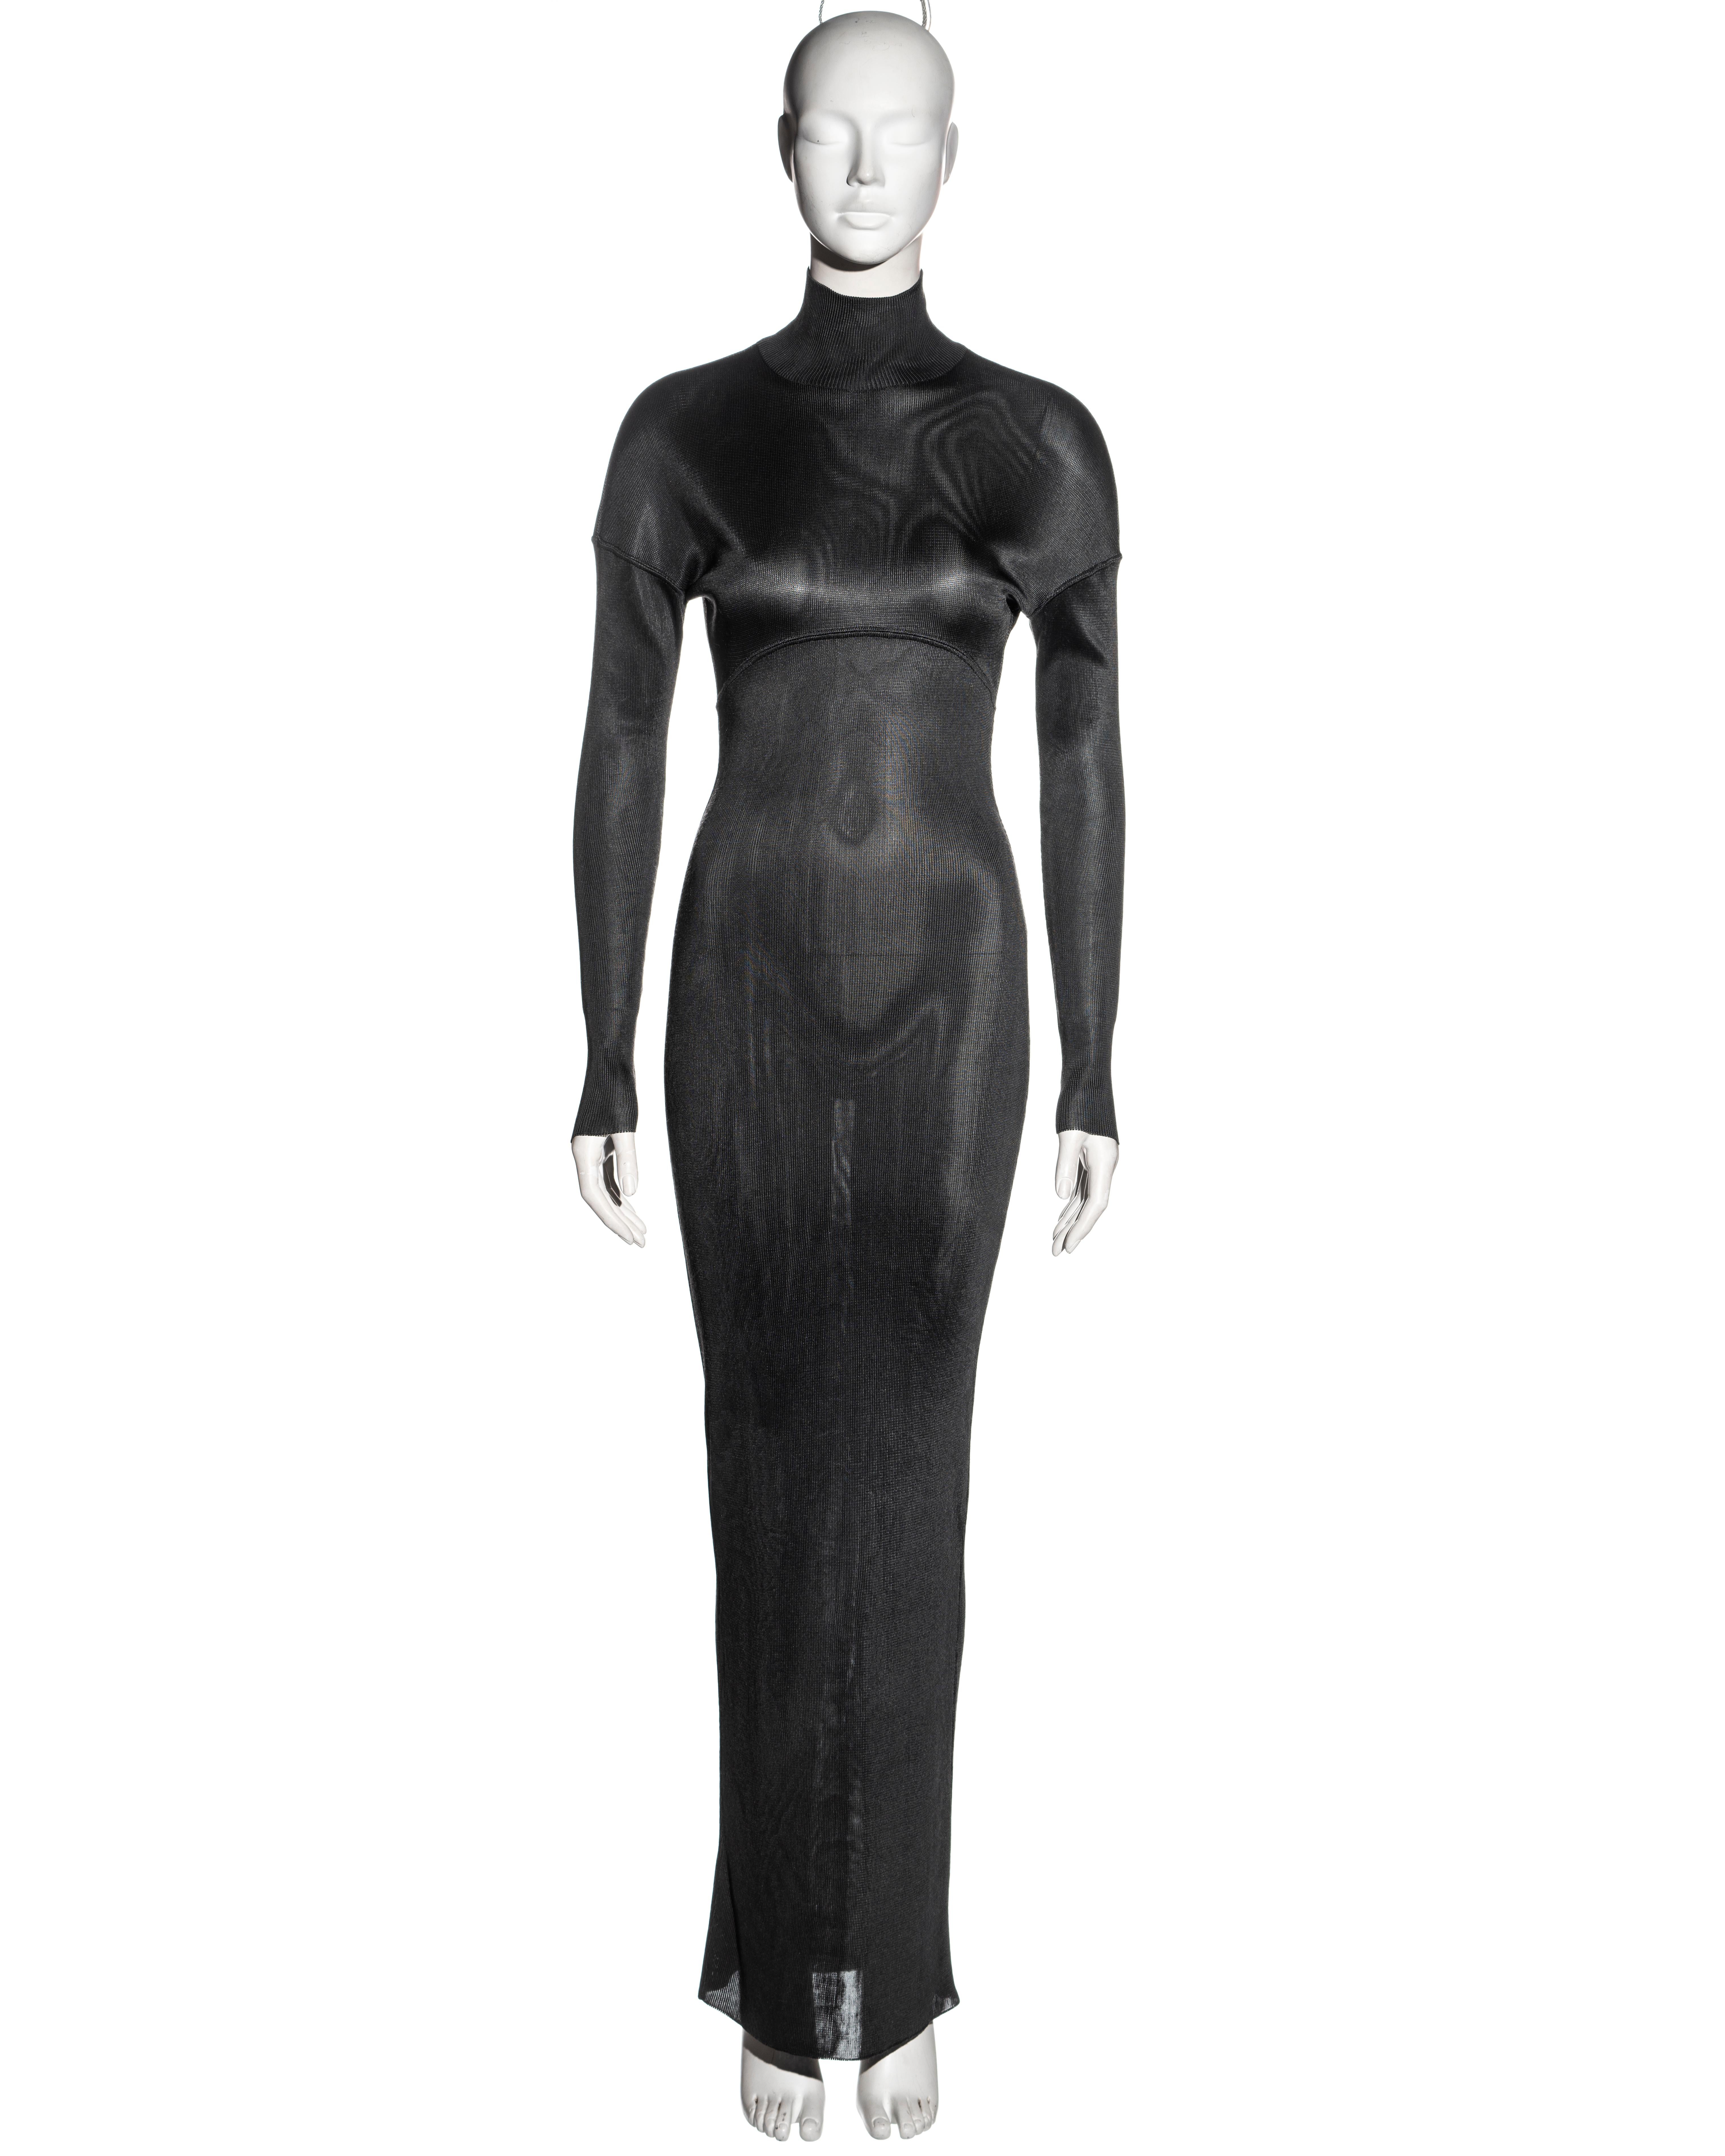 ▪ Azzedine Alaia floor-length dress
▪ Charcoal acetate knit 
▪ Figure-hugging 
▪ Long sleeves 
▪ Turtle-neck 
▪ Size Small
▪ Fall-Winter 1986
▪ 100% Acetate 
▪ Made in Italy